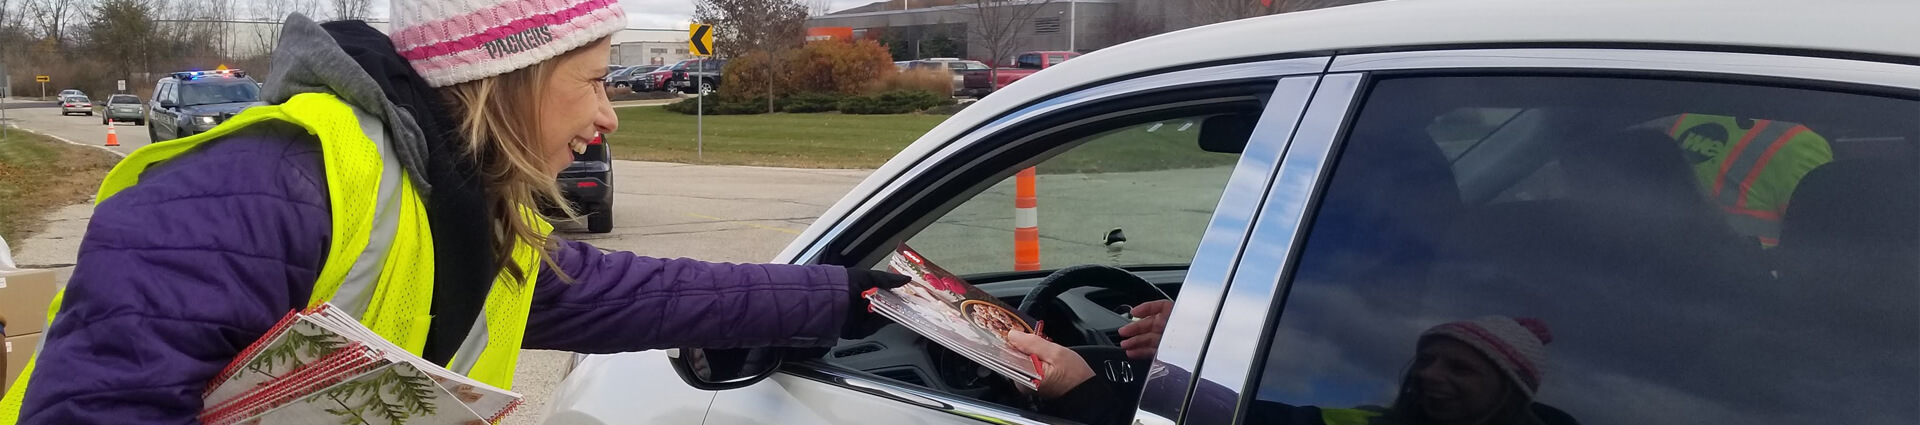 Cookie Book distribution